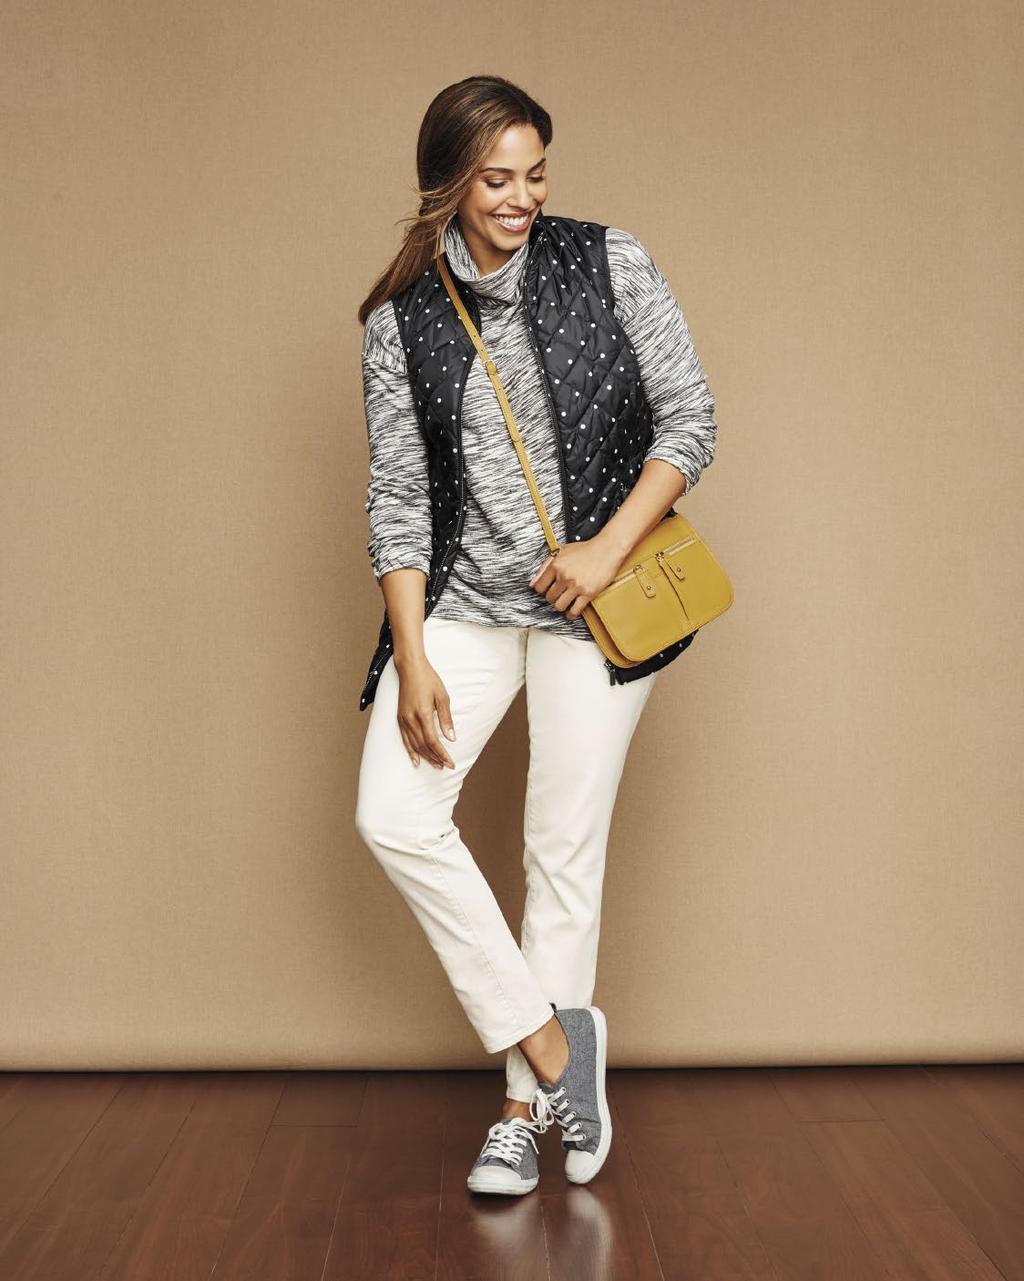 Mixing patterns in the same tones has a slimming look. Wearing thinner layers gives you warmth without looking bulky.